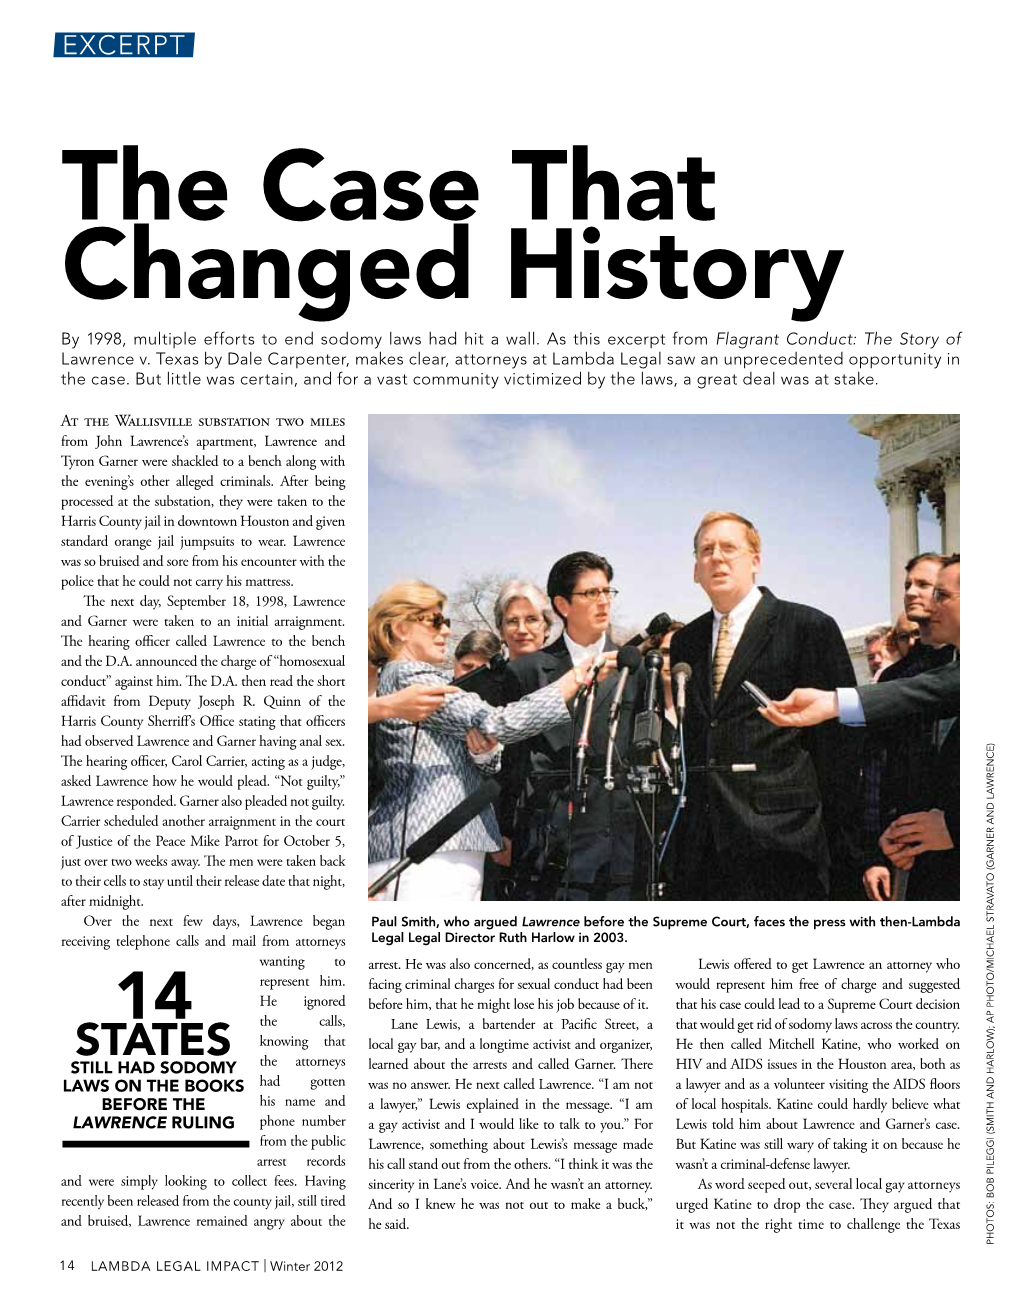 The Case That Changed History by 1998, Multiple Efforts to End Sodomy Laws Had Hit a Wall